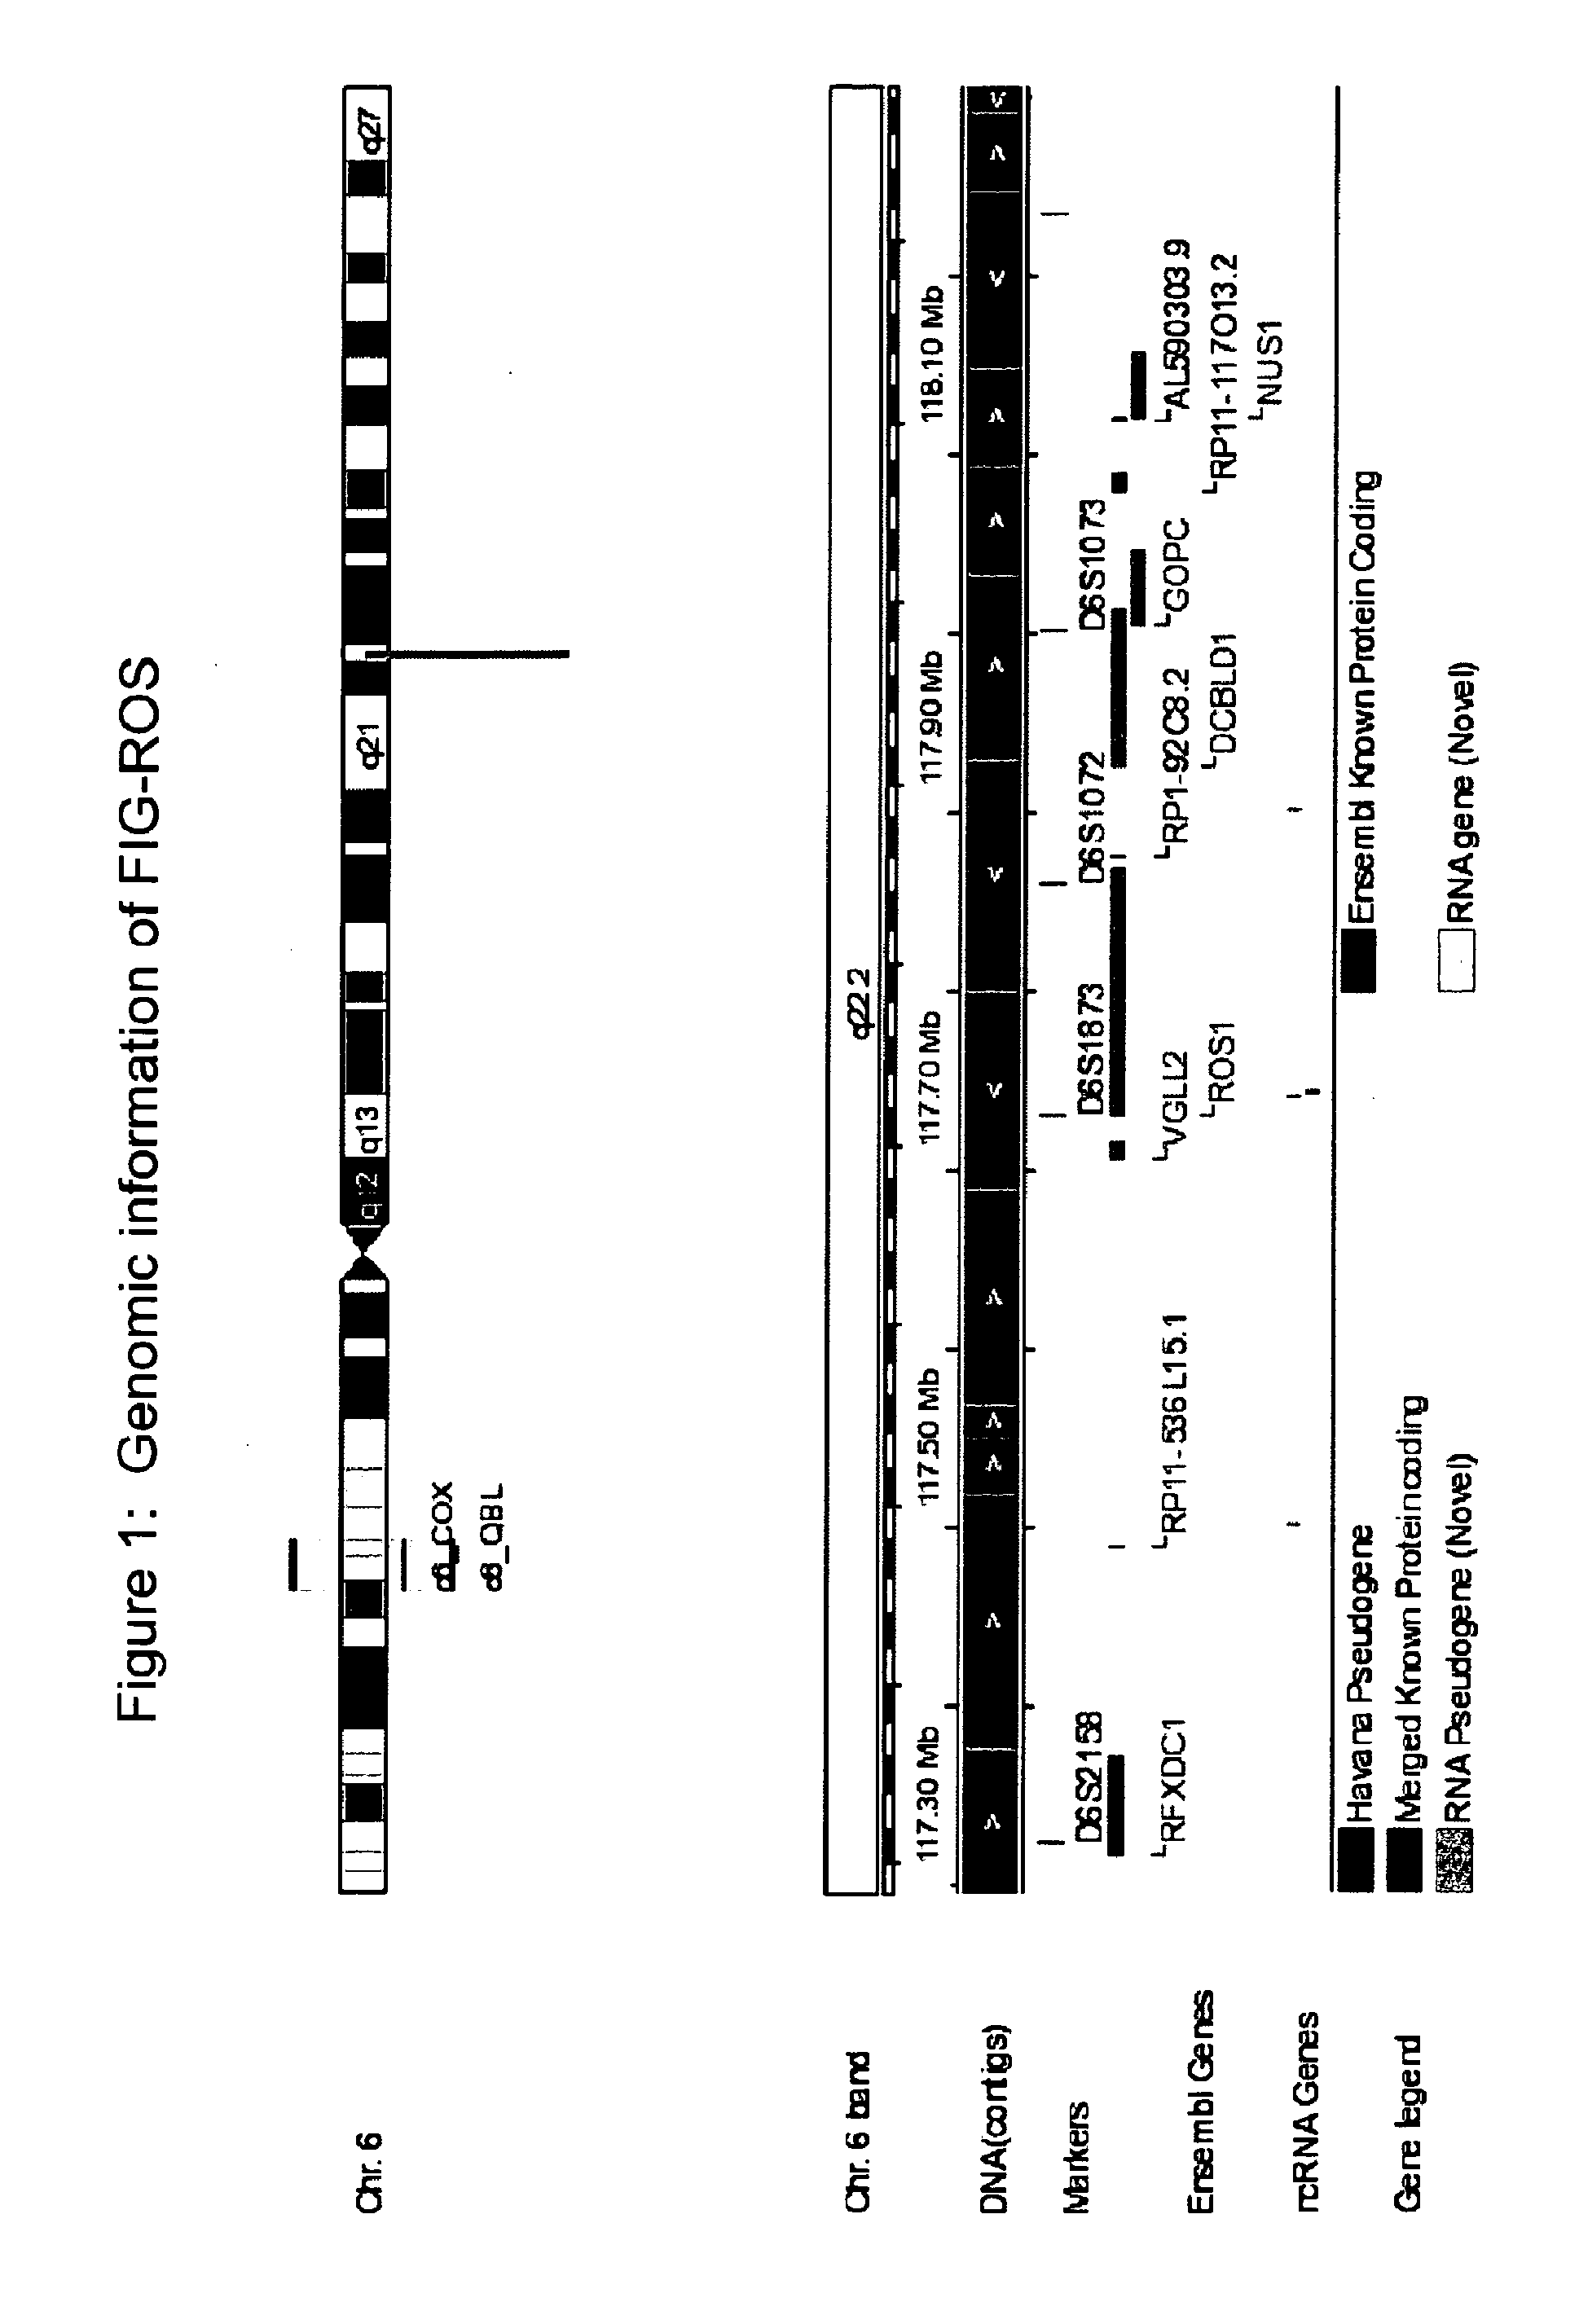 Mutant ROS Expression In Human Cancer